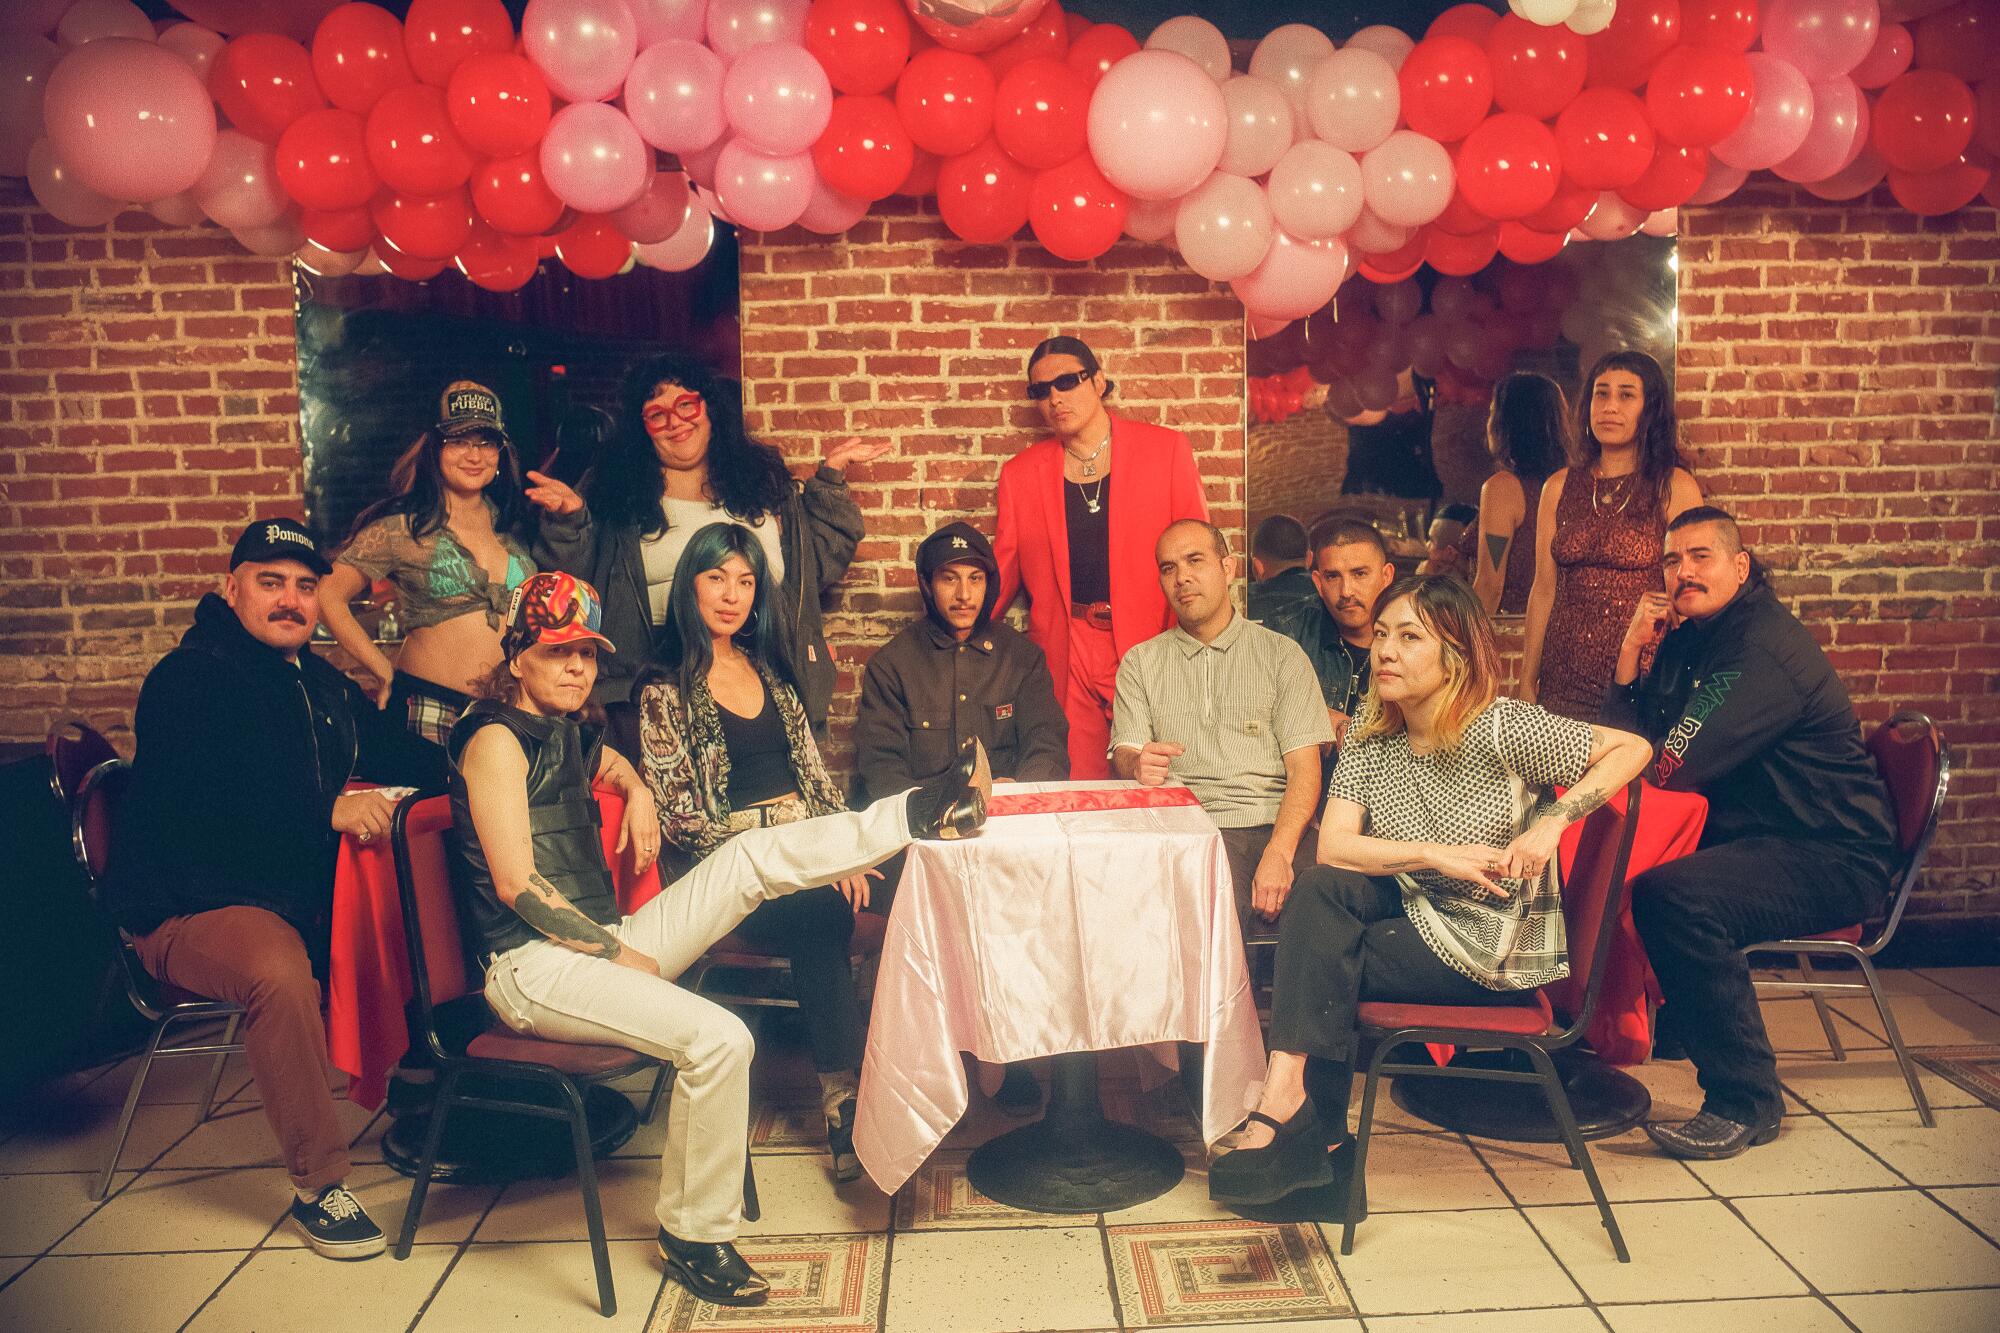 A group of artists gather around tables, pink and red balloons above them.